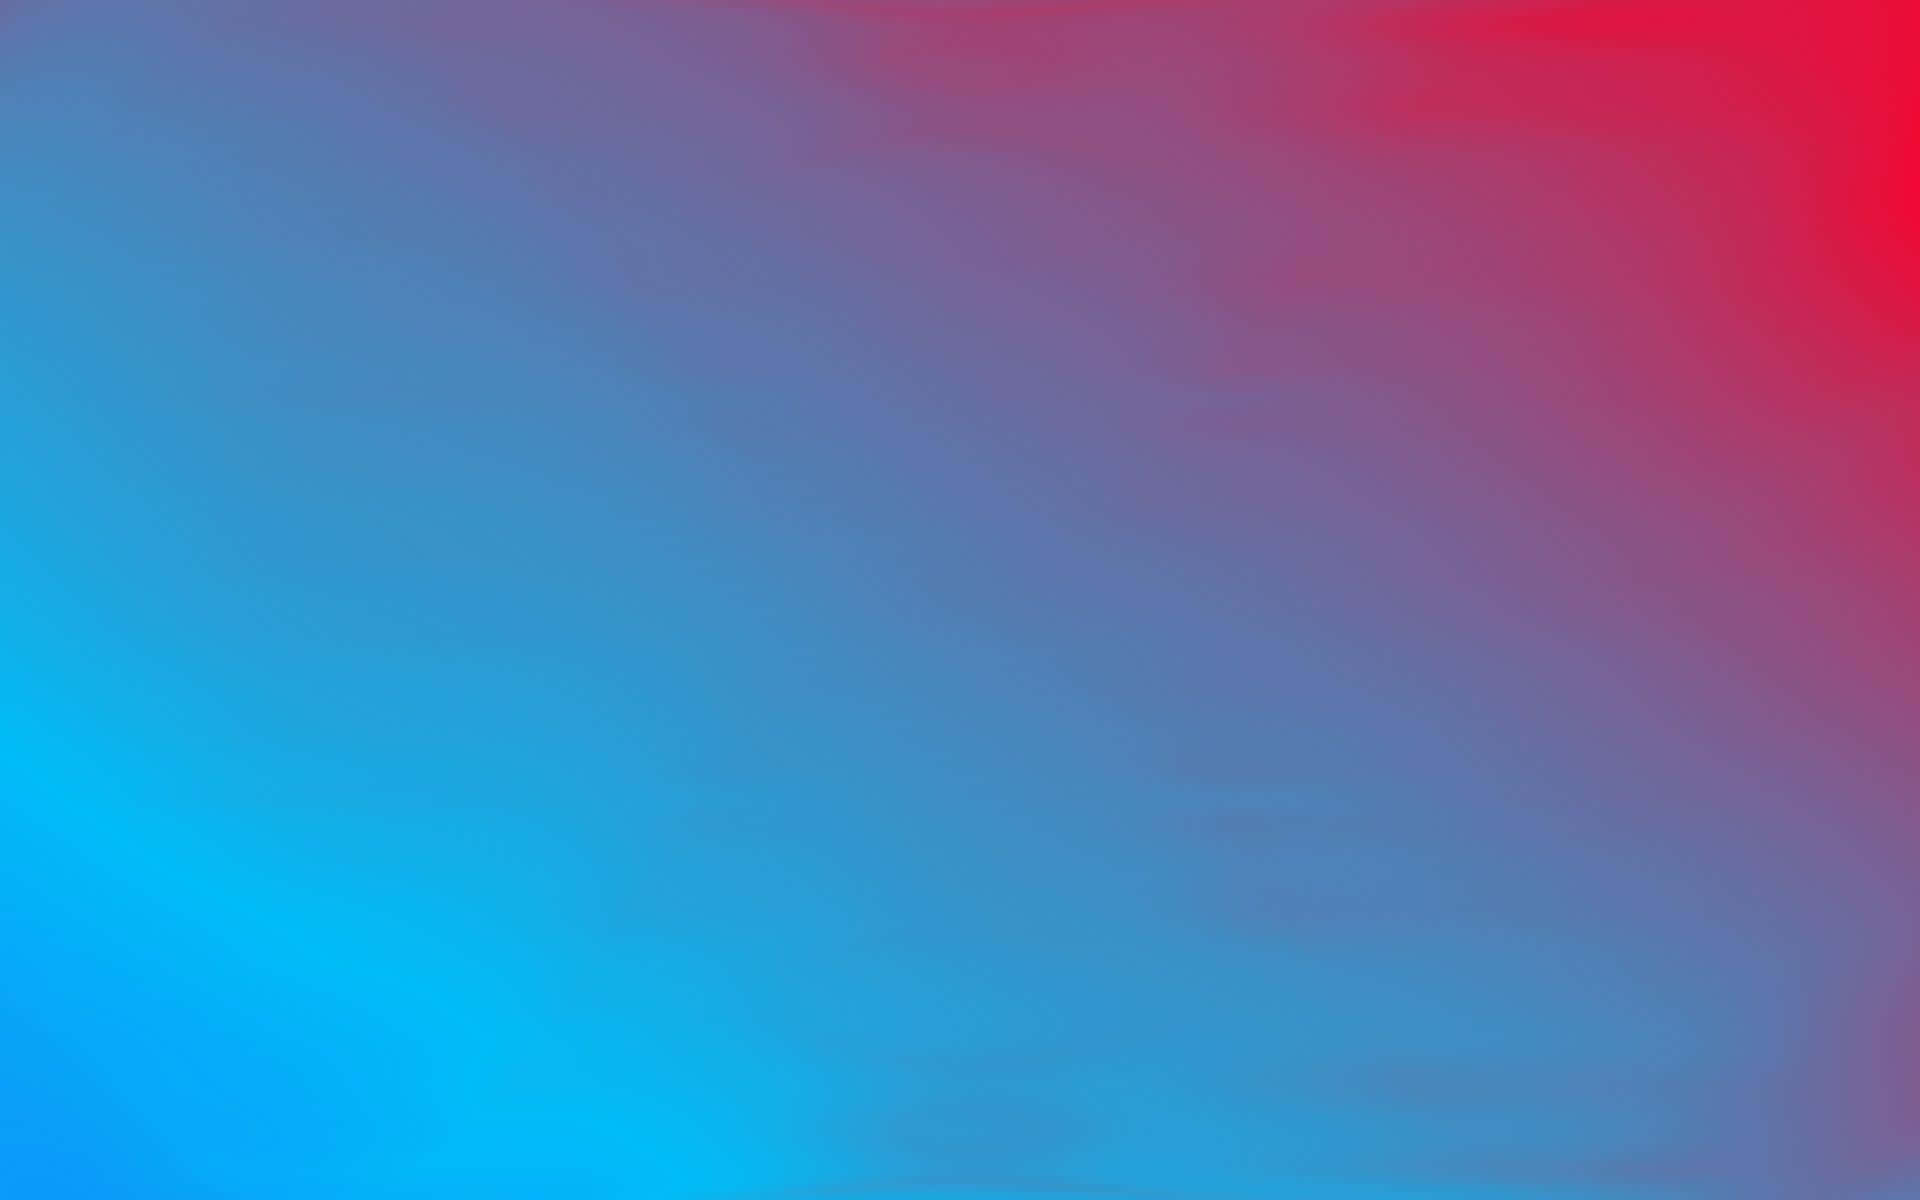 A Blue And Red Background With A Blue And Red Gradient